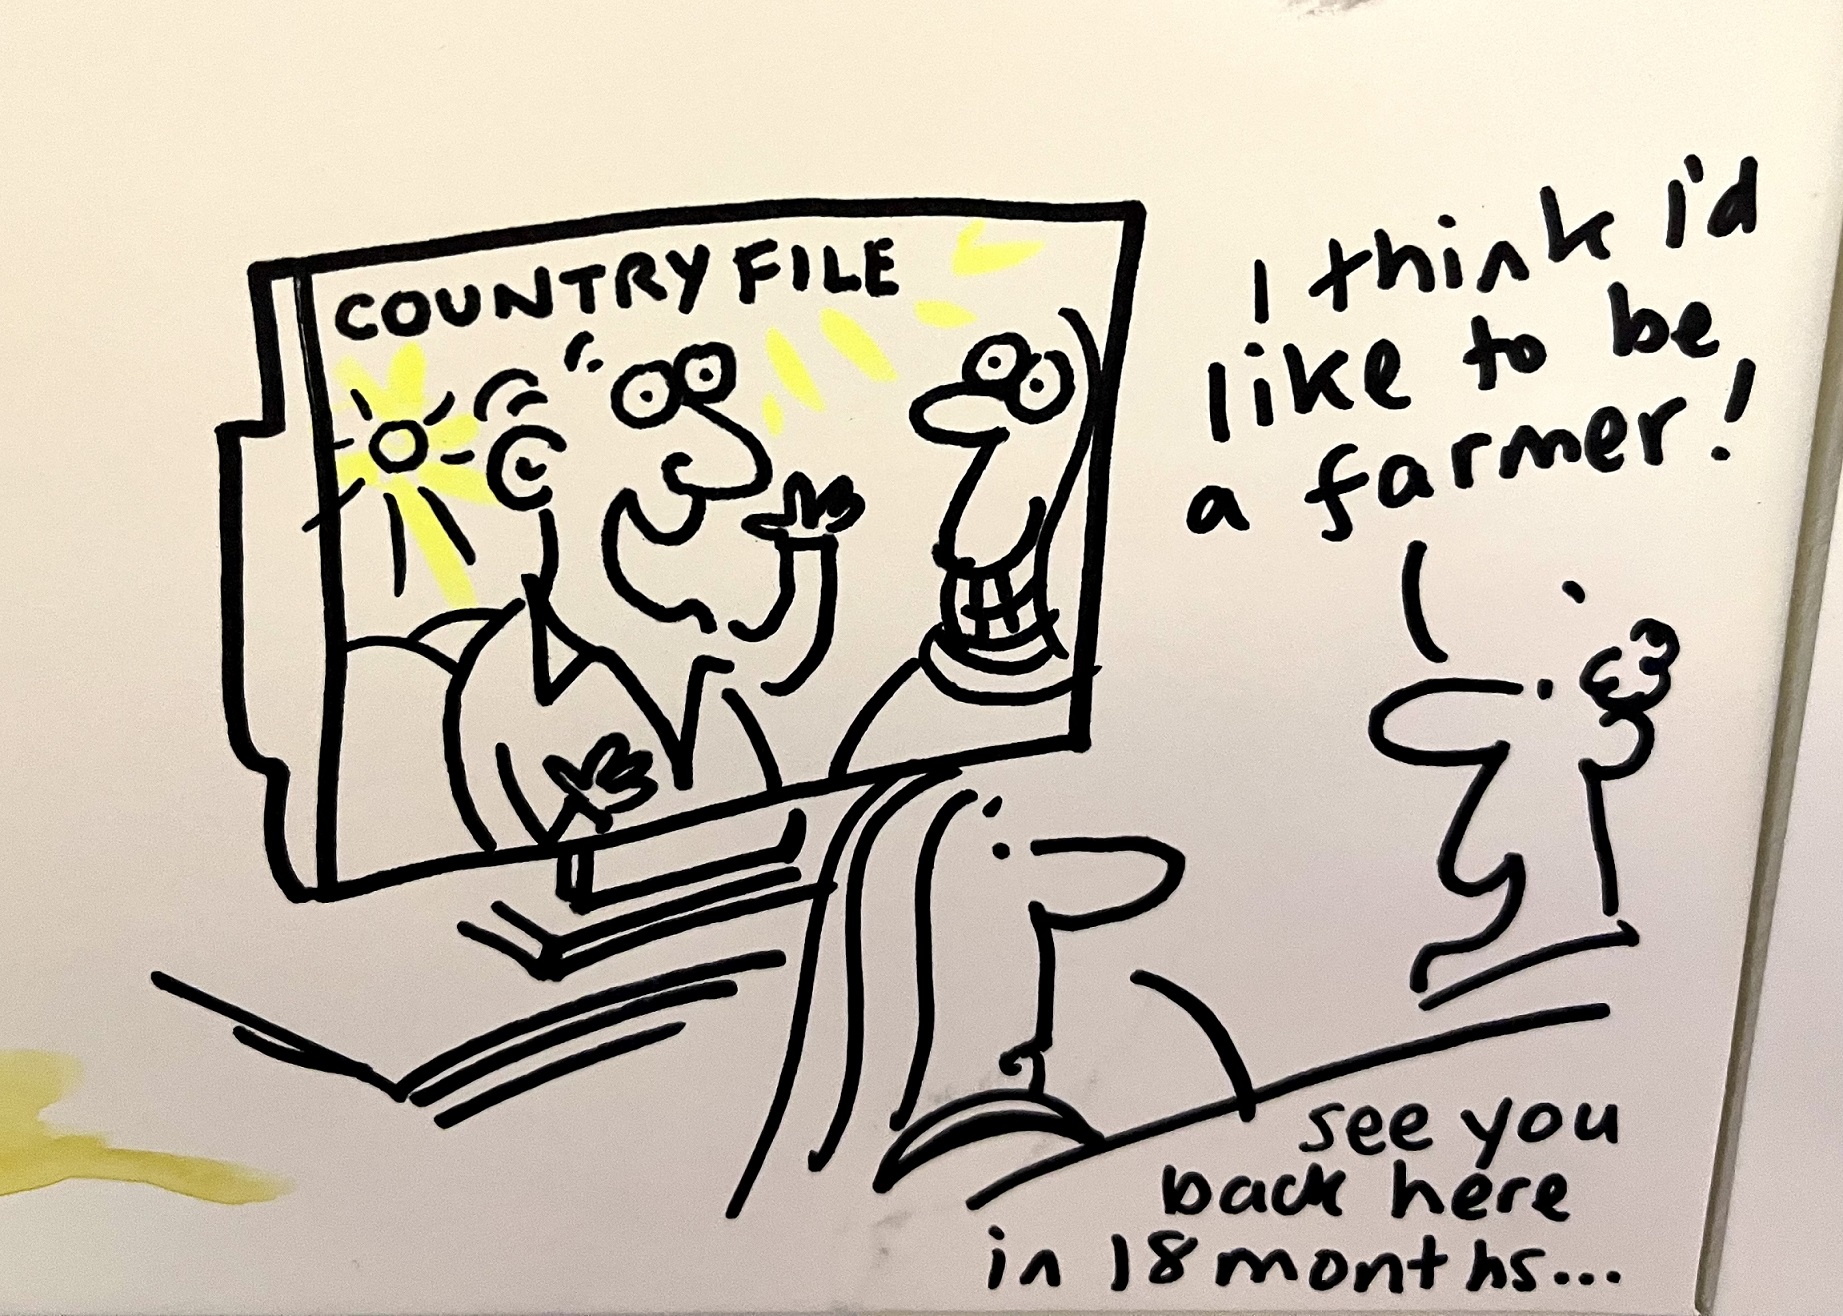 AgriLeader Forum 2023 cartoon about Countryfile TV show